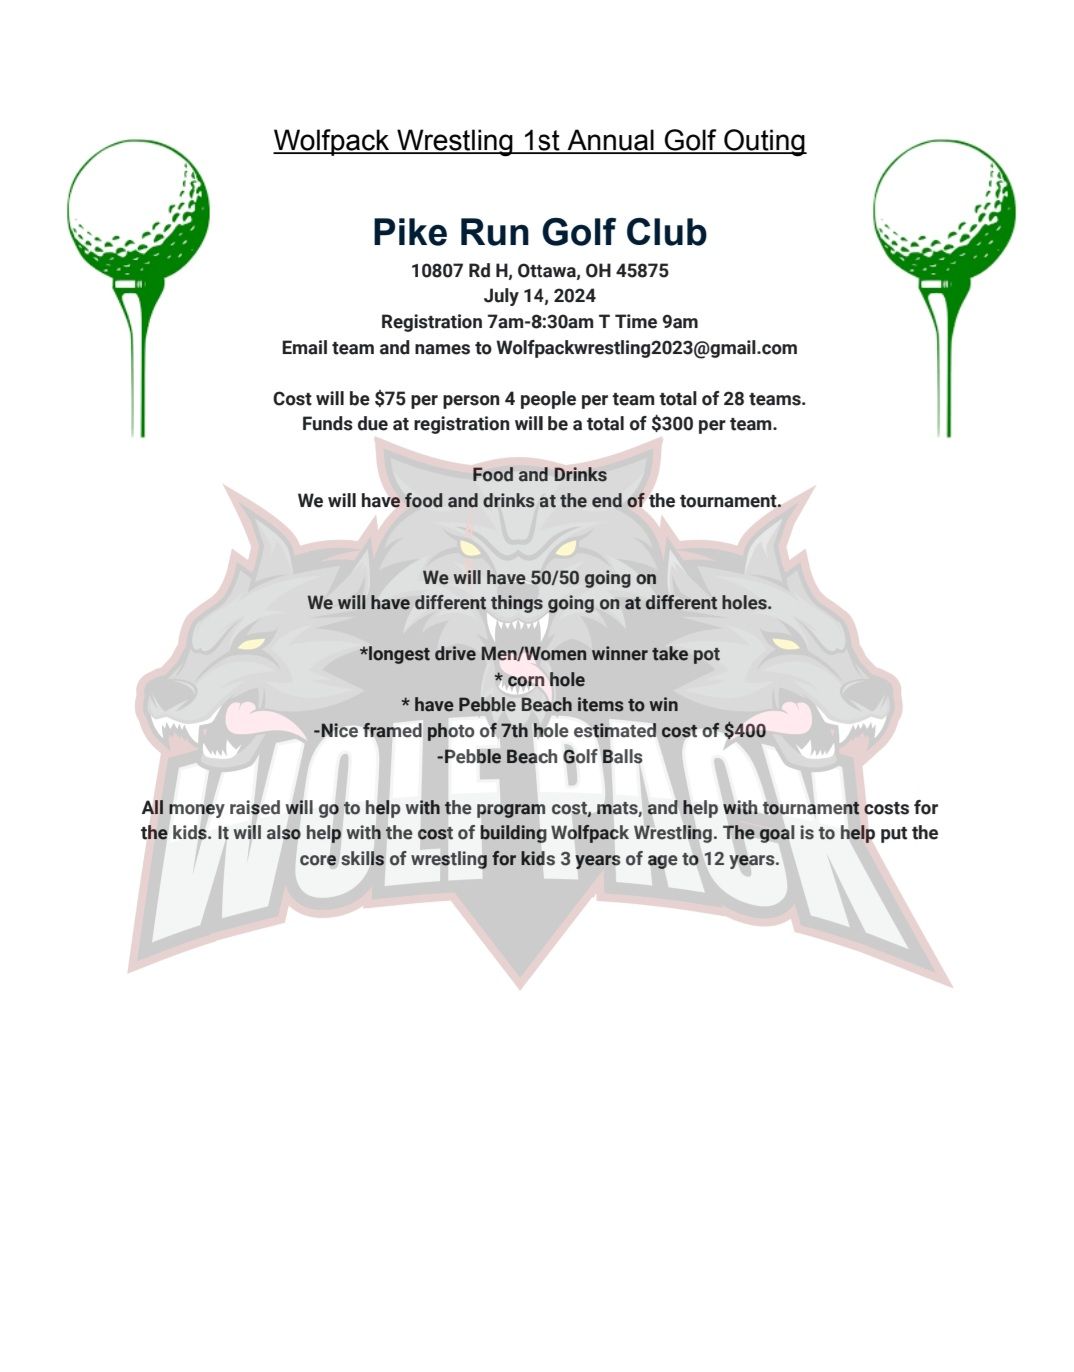 Golf Outing for Wolfpack